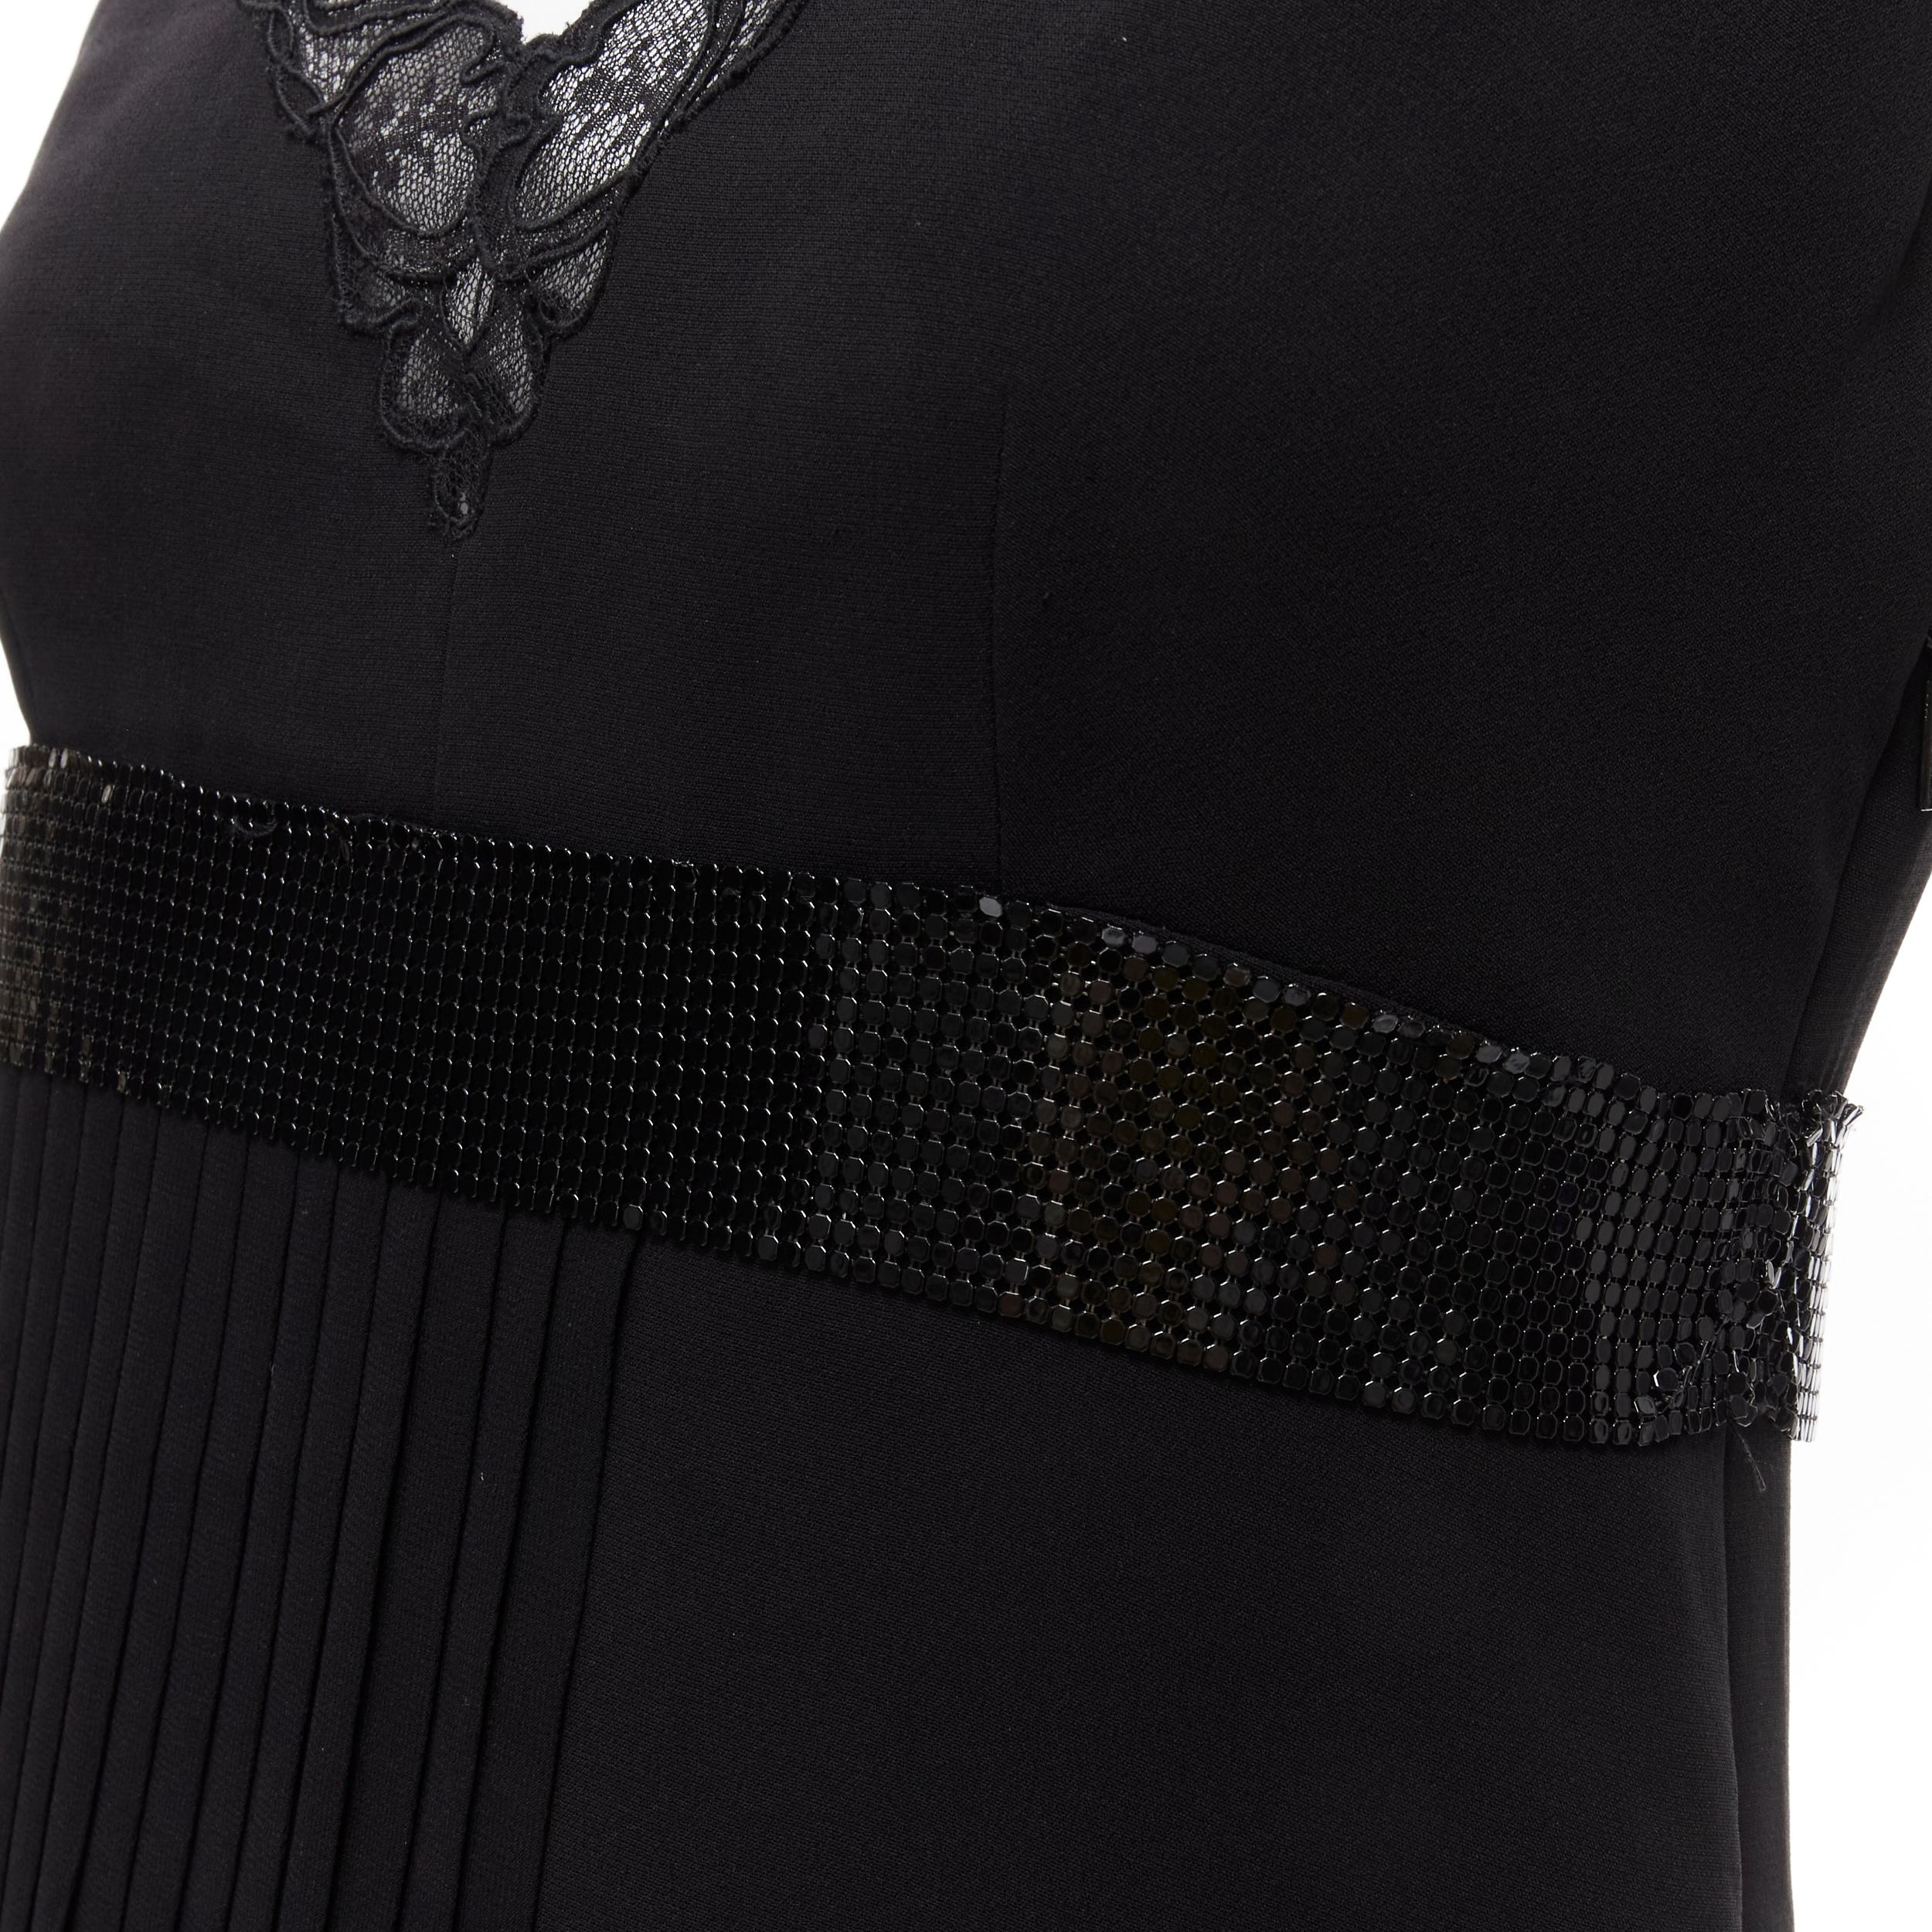 VERSACE 2015 black silk lace V-neck chainmail trim pleated mini dress IT40 S
Reference: TGAS/D00315
Brand: Versace
Designer: Donatella Versace
Collection: 2015
Material: Silk
Color: Black
Pattern: Solid
Closure: Zip
Lining: Black Silk
Extra Details: